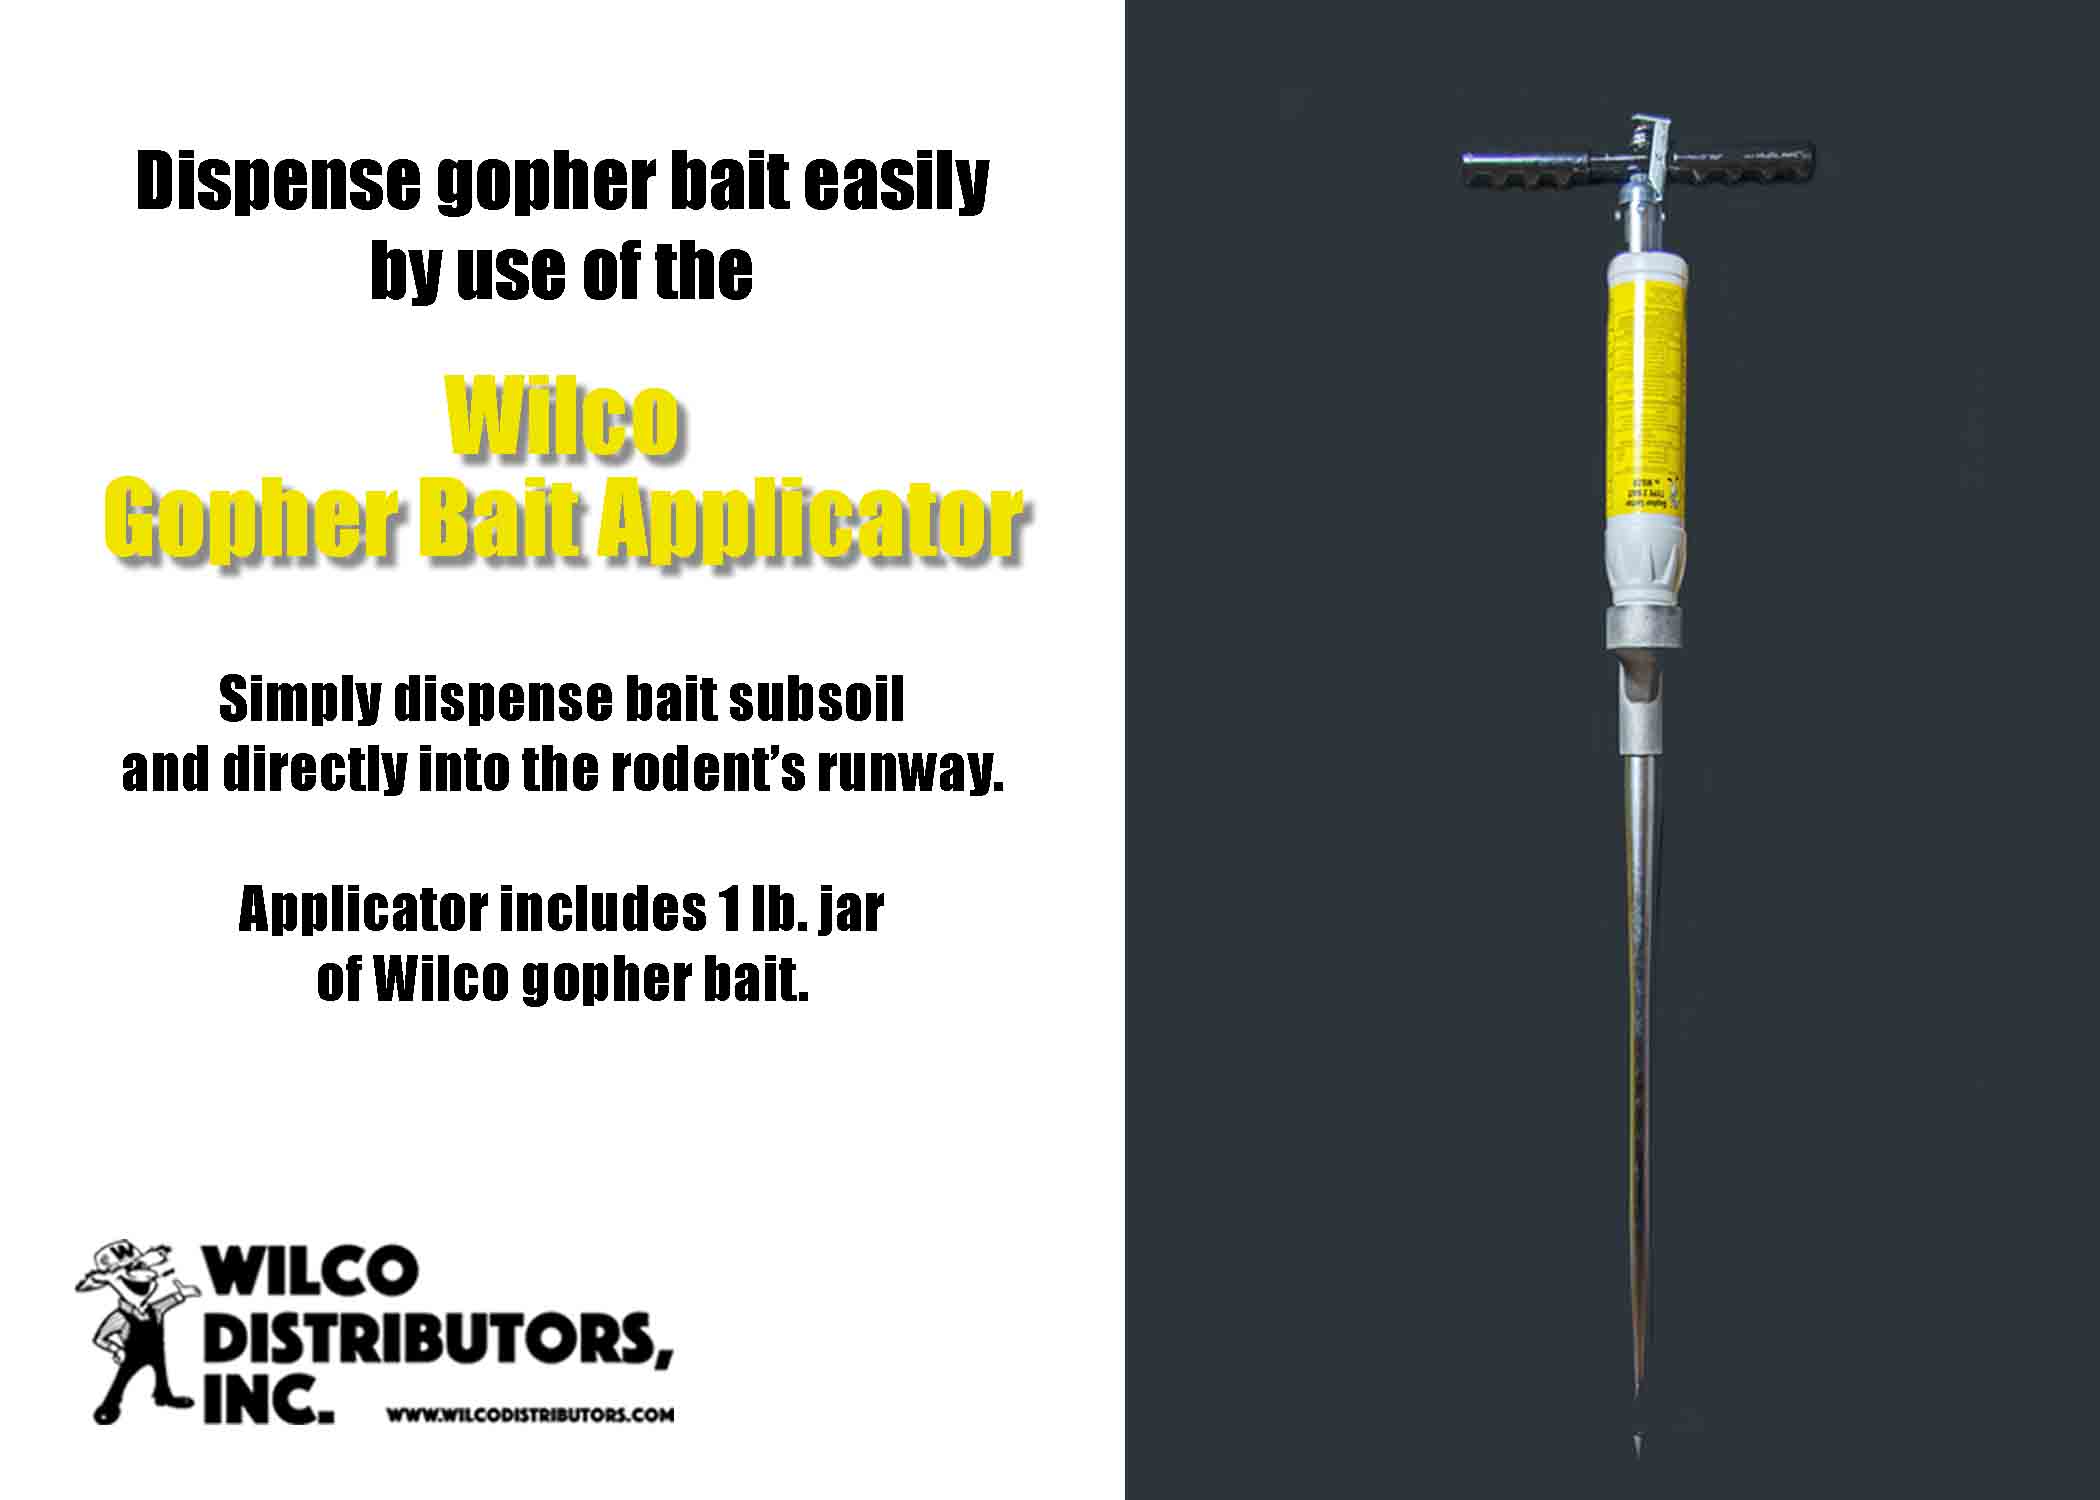 Easily dispense gopher bait into the rodent’s runway by use of this applicator..